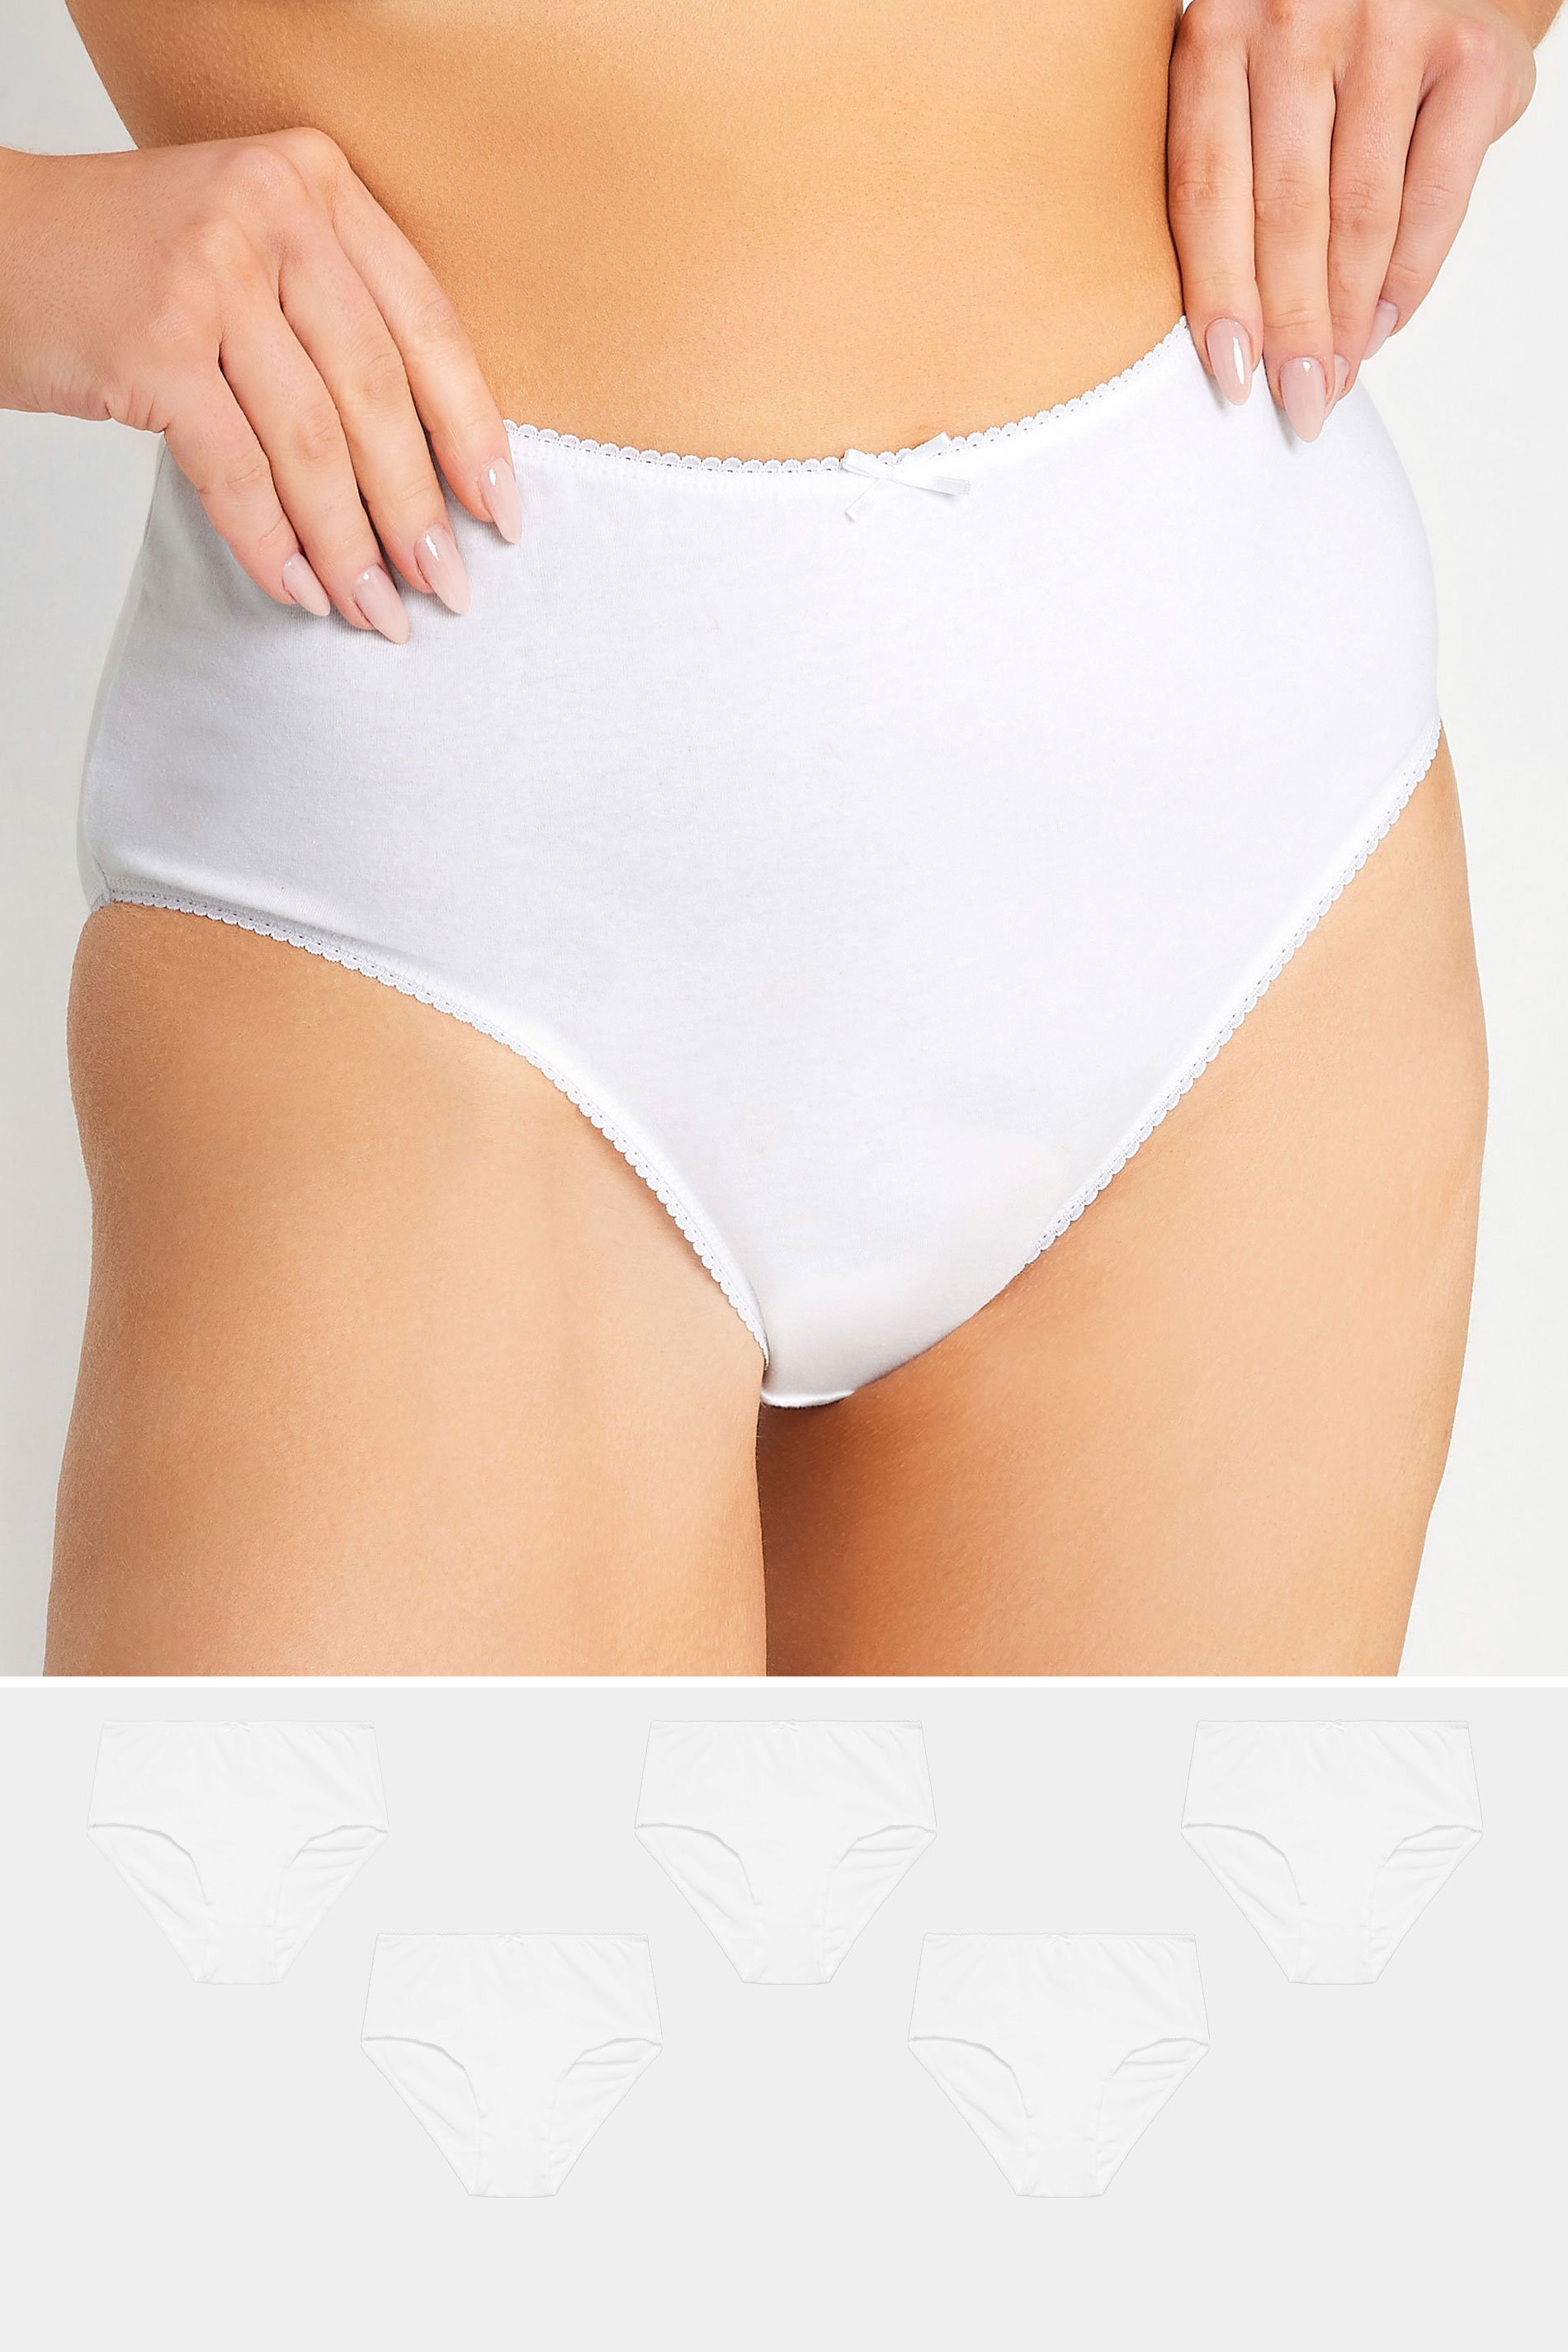 M&Co White 5 PACK High Waisted Full Briefs | M&Co  1